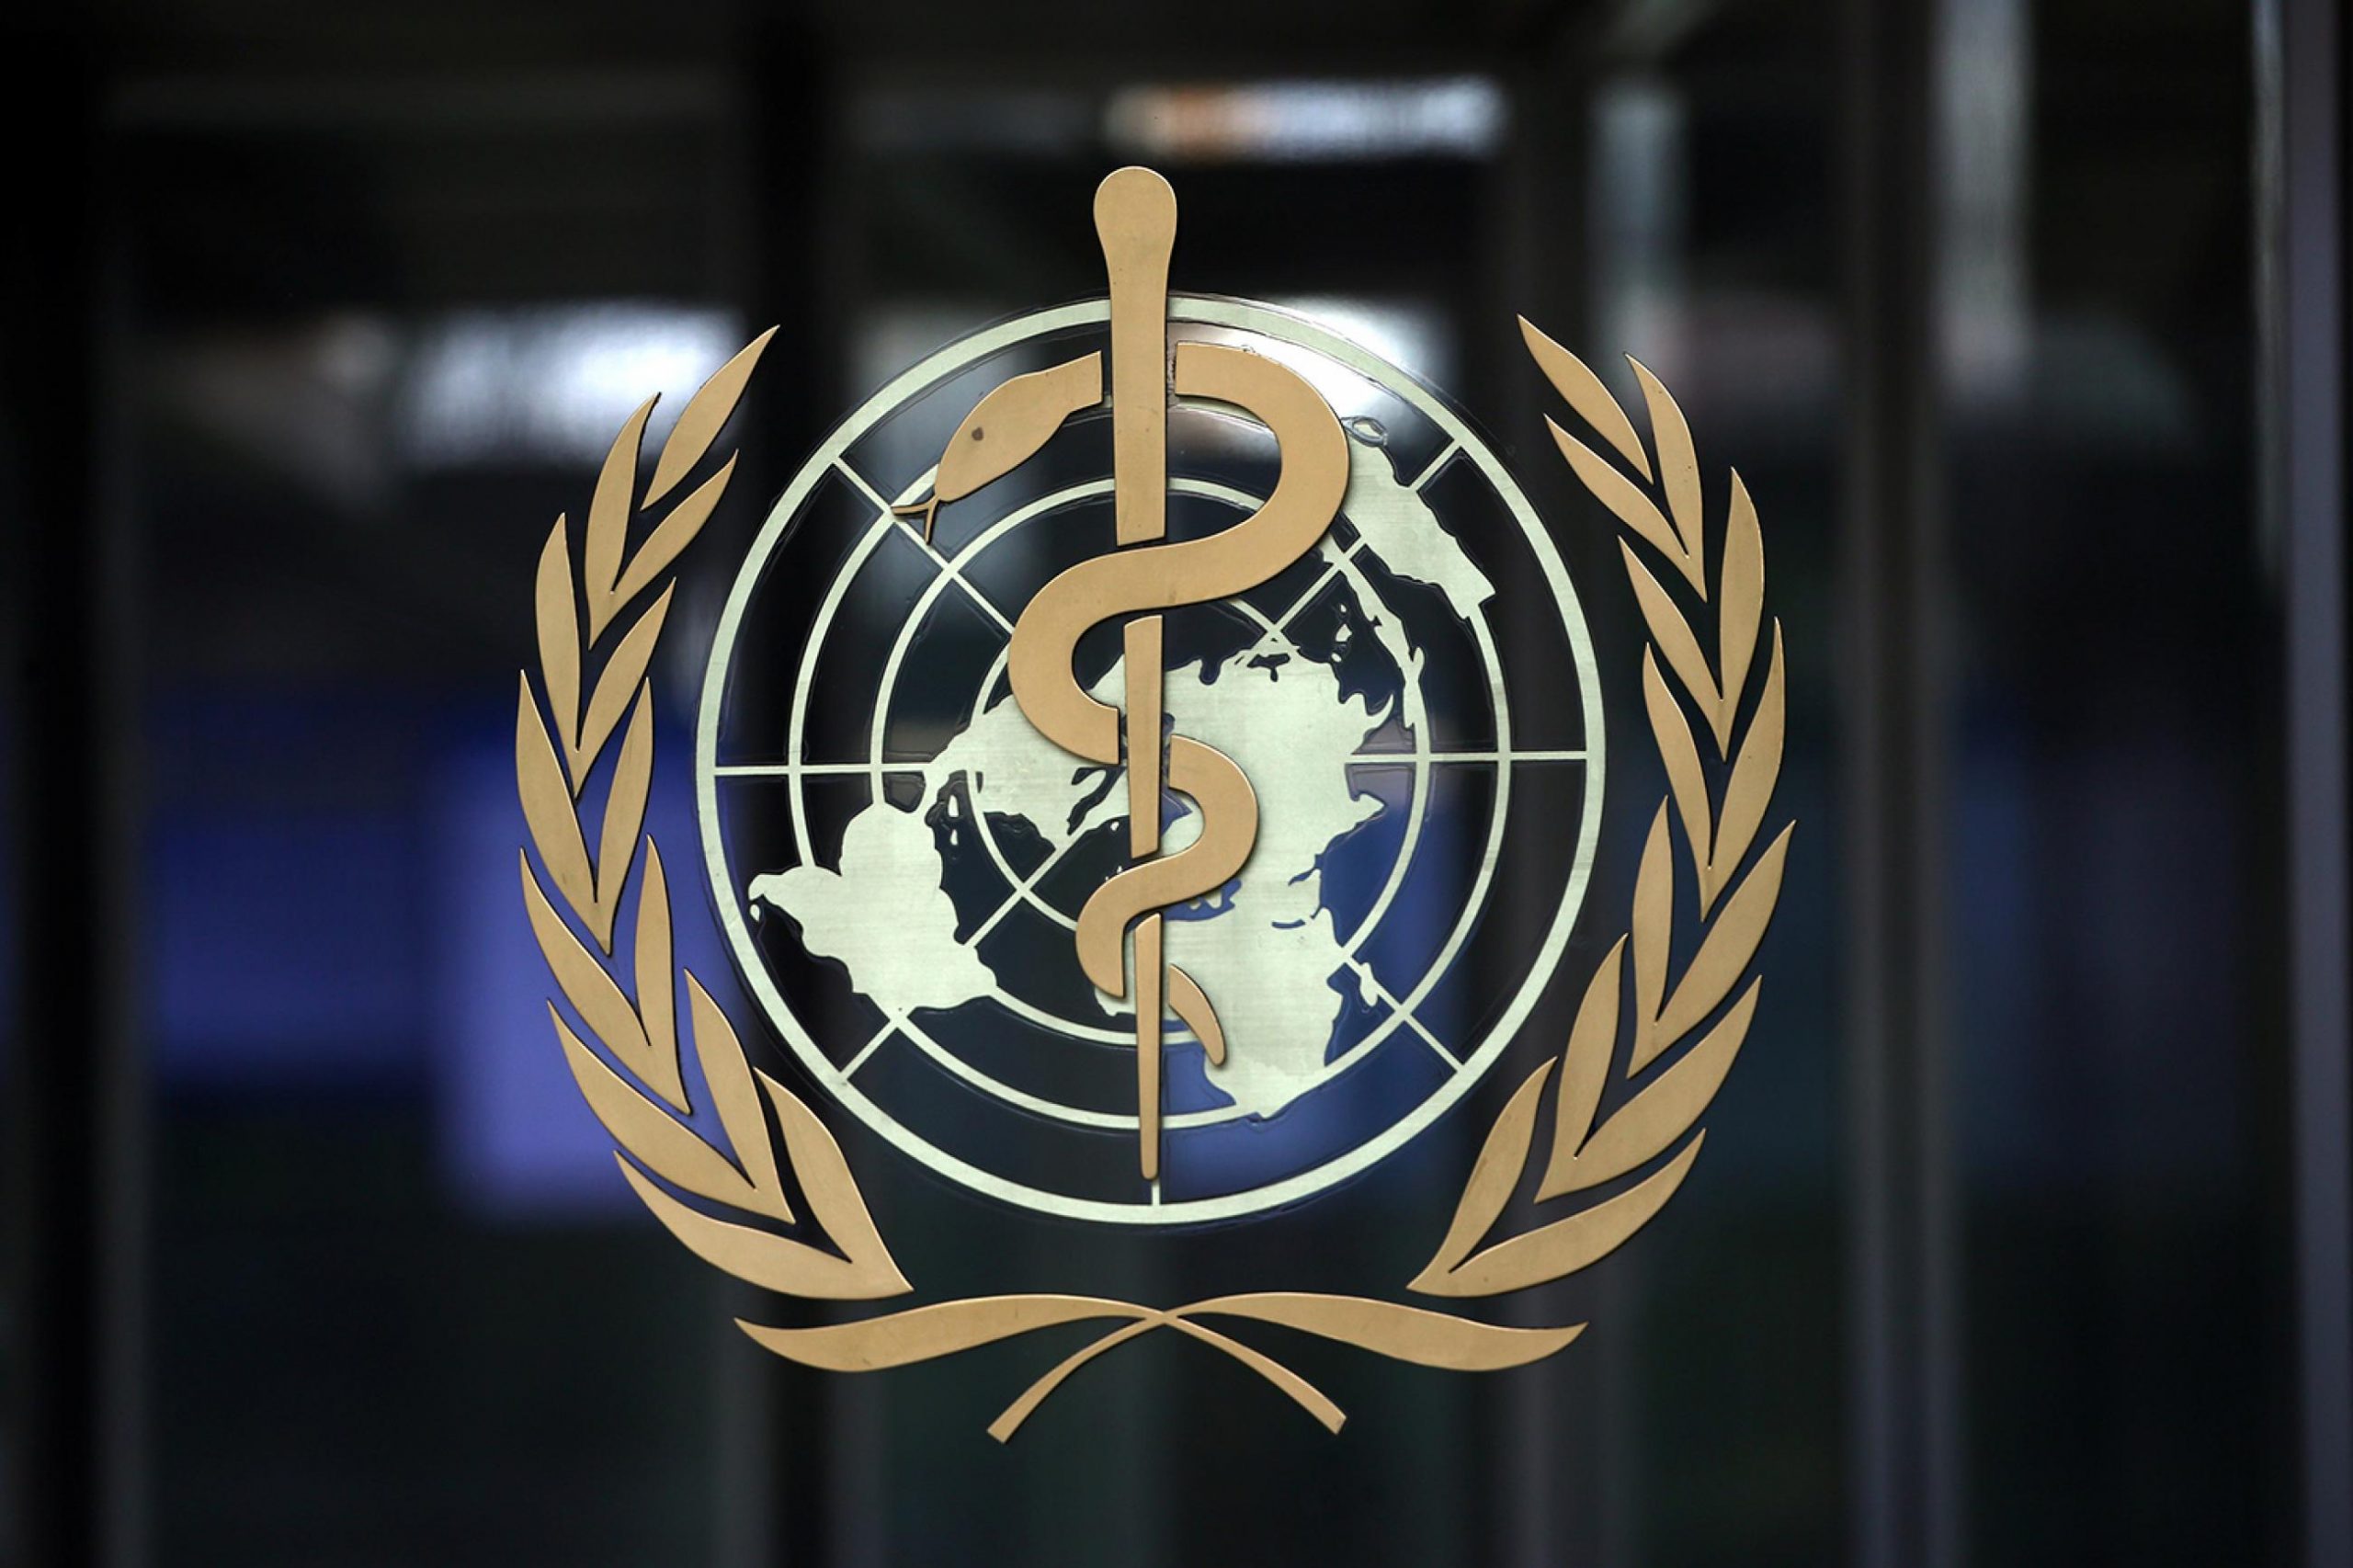 “One Health”, ESG & “Sustainable Development”: Inside the WHO’s “Pandemic Treaty”